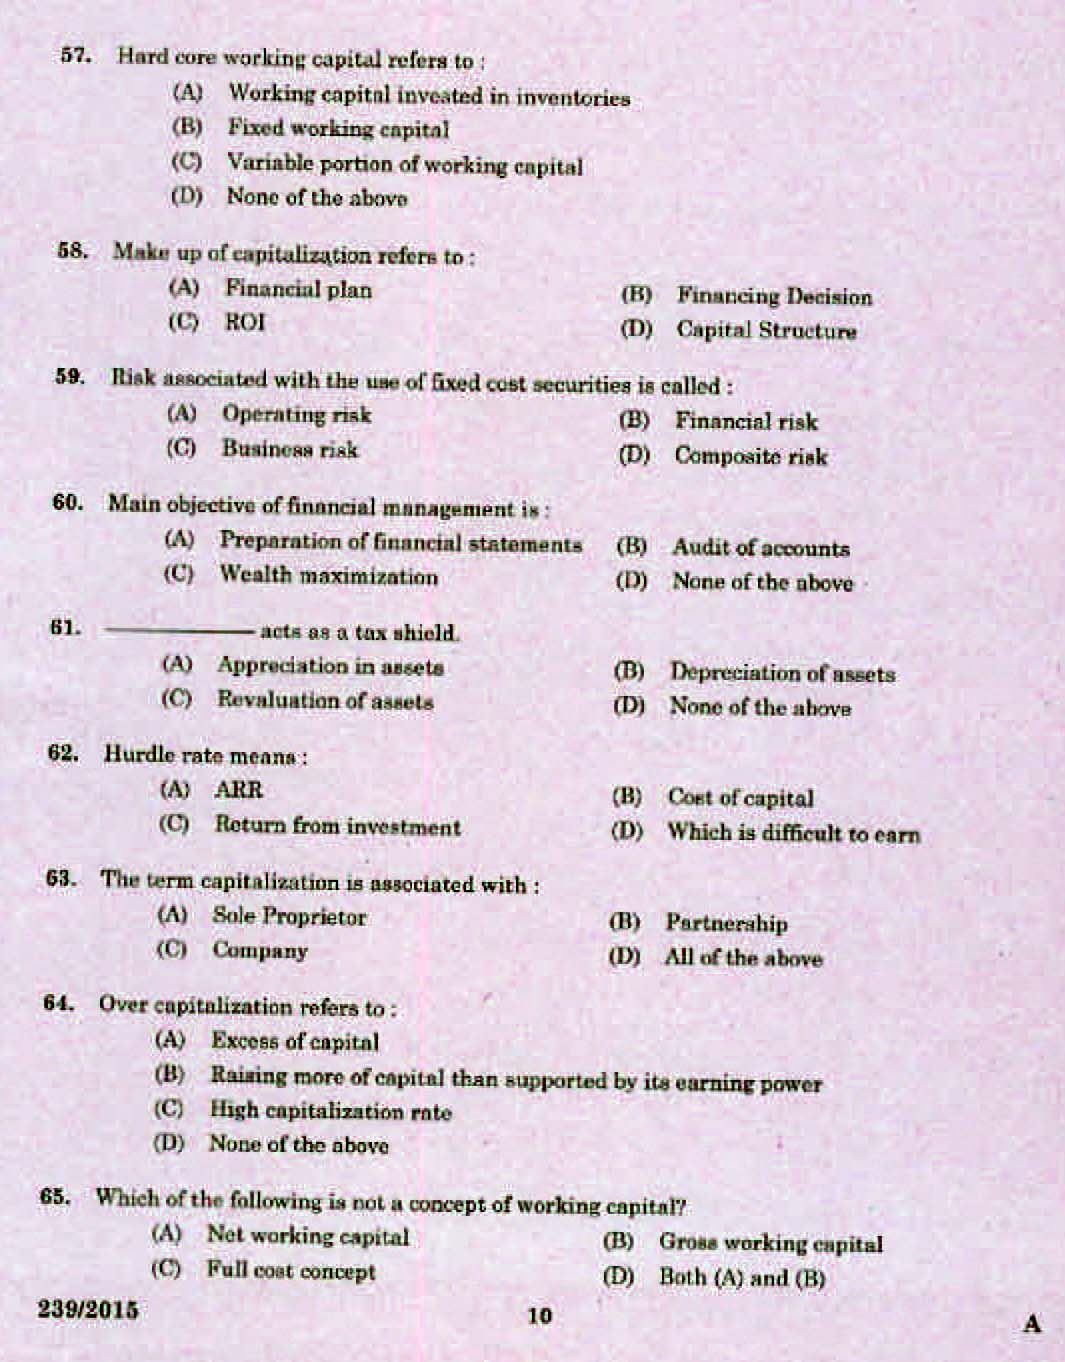 Kerala PSC Accounts Officer OMR Exam 2015 Question Paper Code 2392015 8